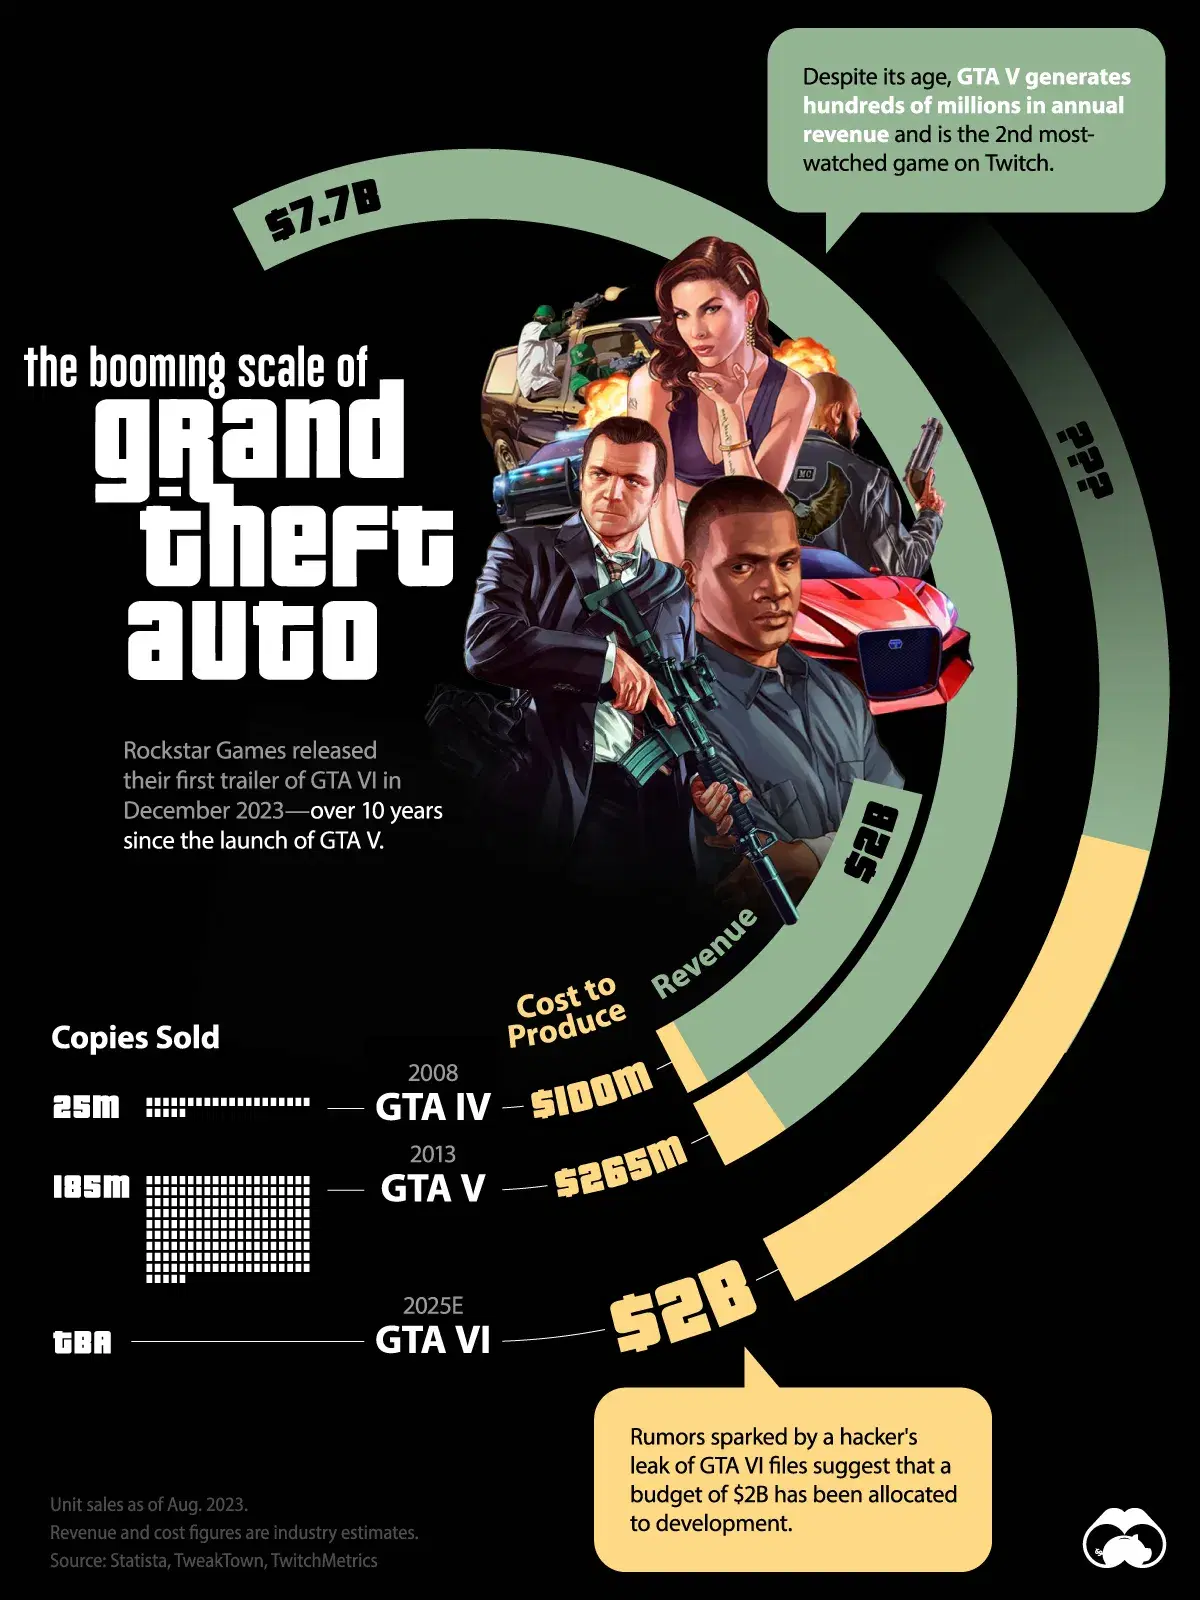 Could GTA VI be the Most Successful Video Game Ever? 💵